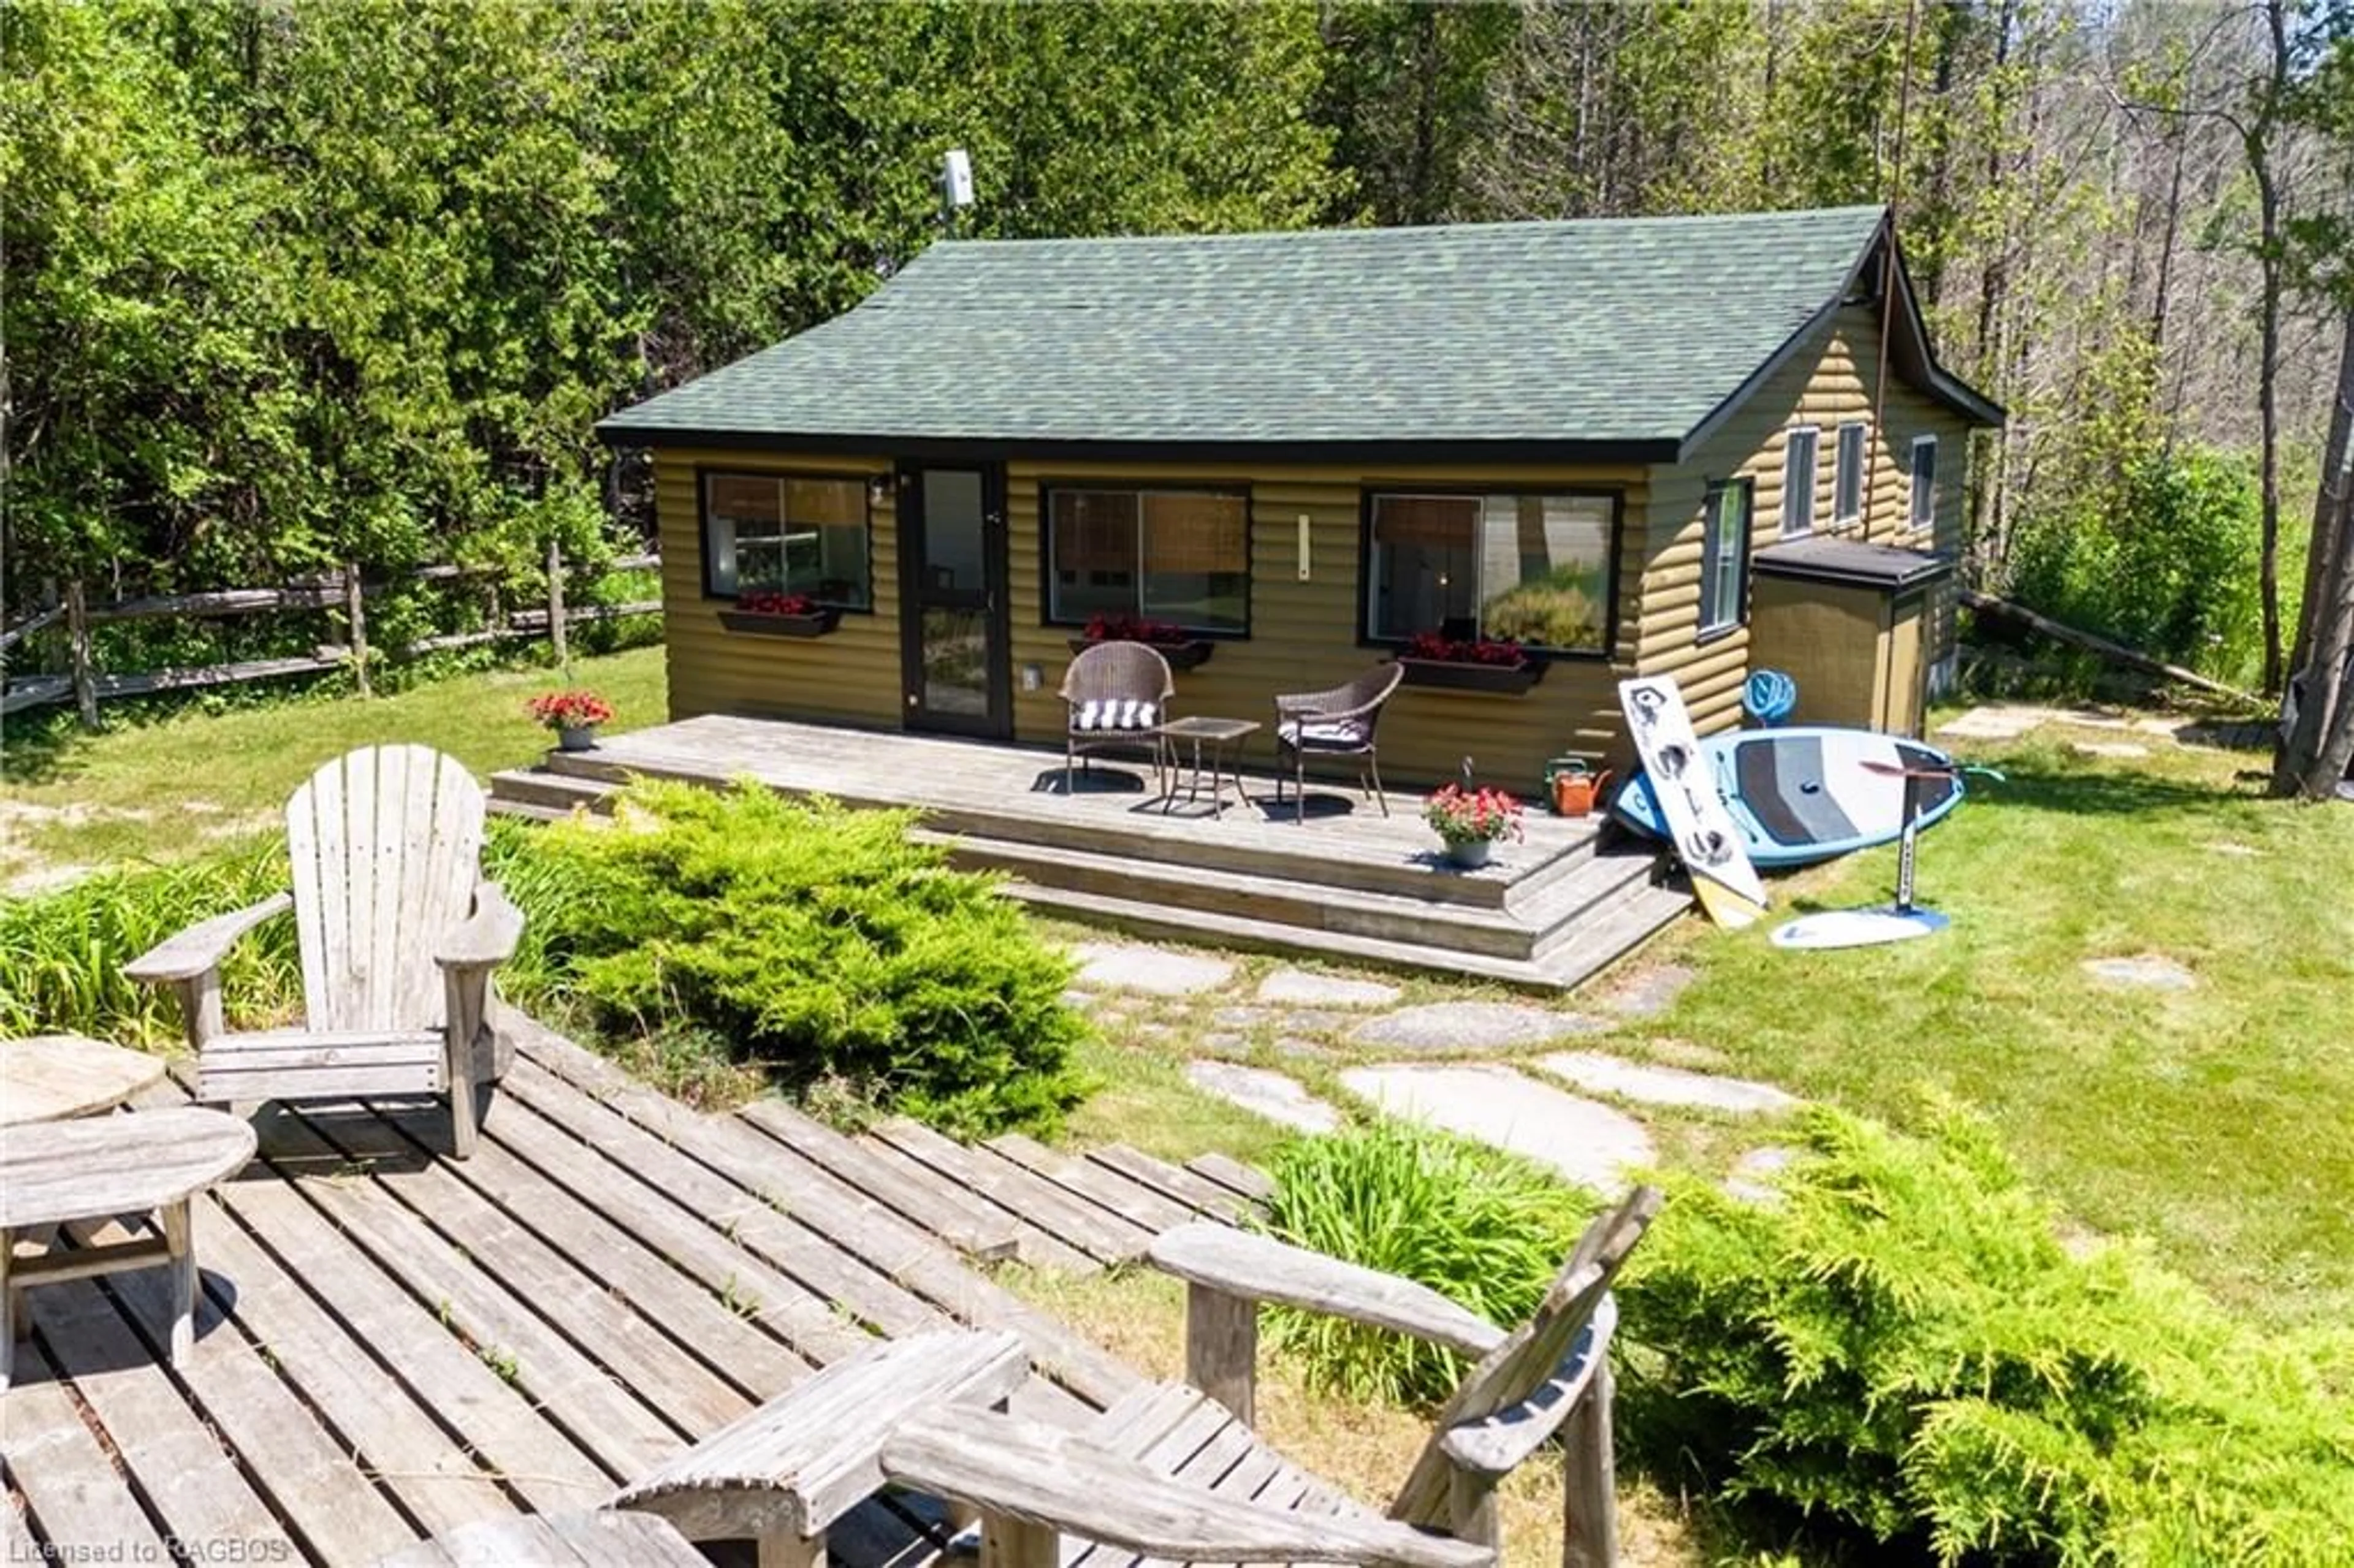 Cottage for 251 Shoreline Ave, Oliphant Ontario N0H 2T0